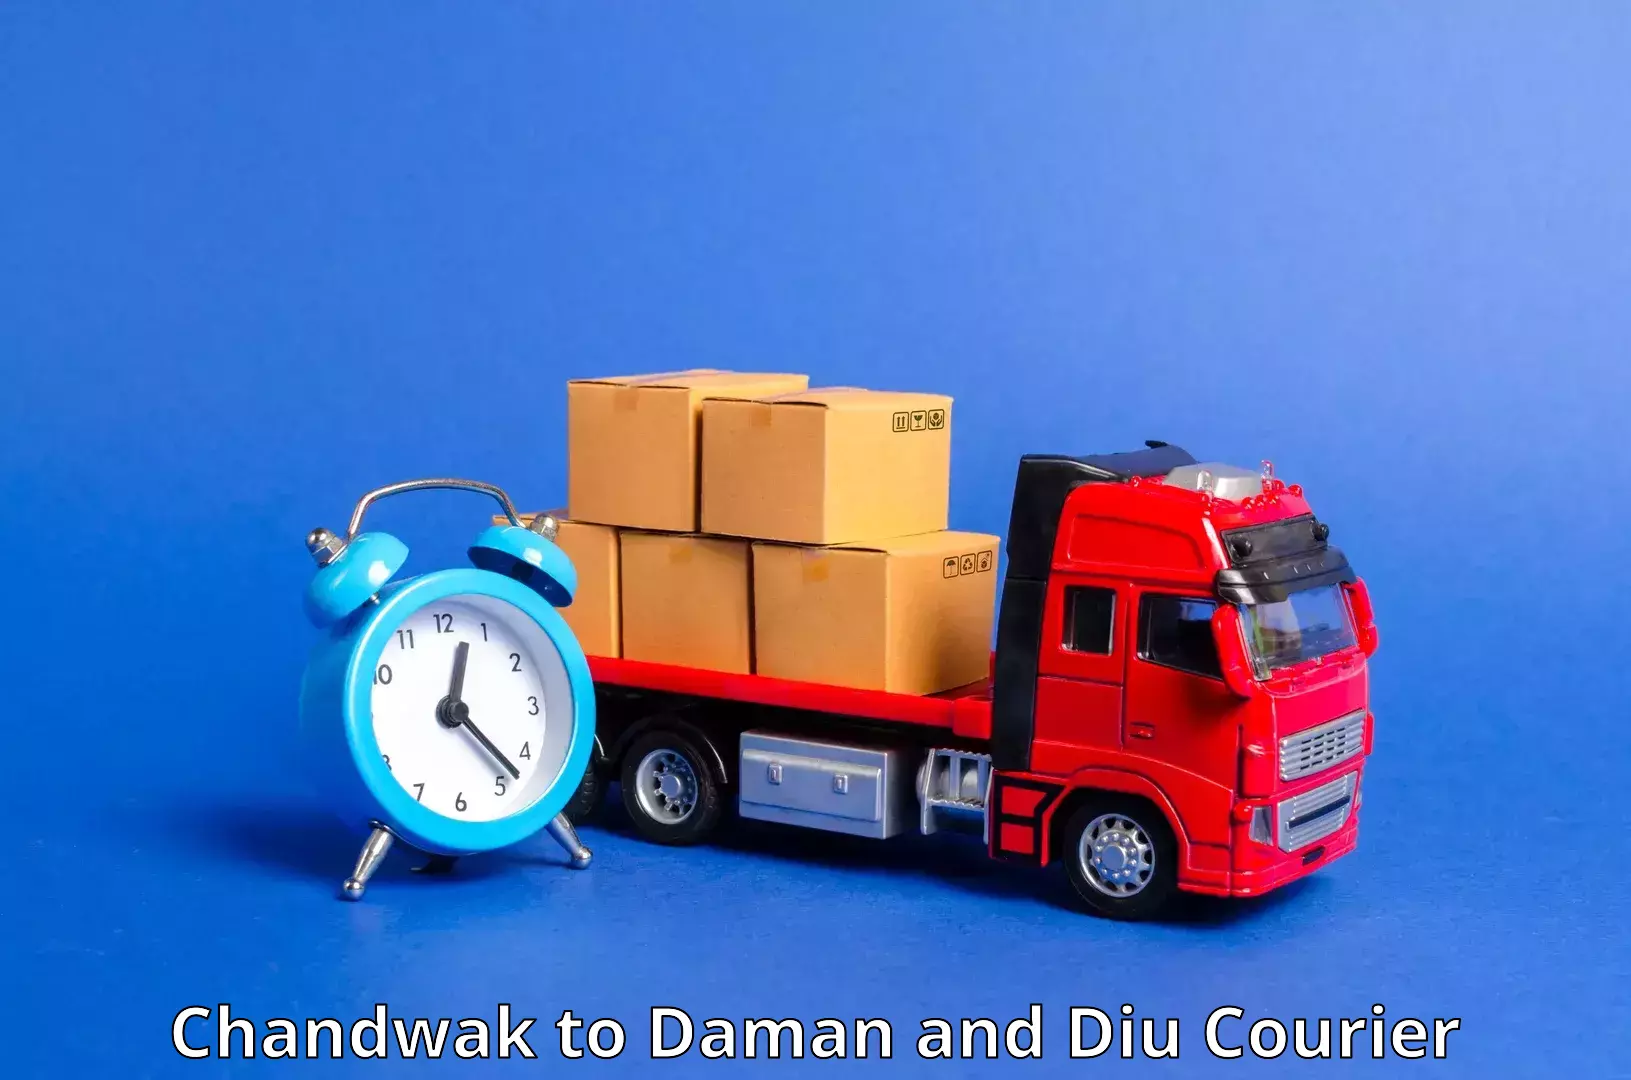 On-call courier service Chandwak to Daman and Diu